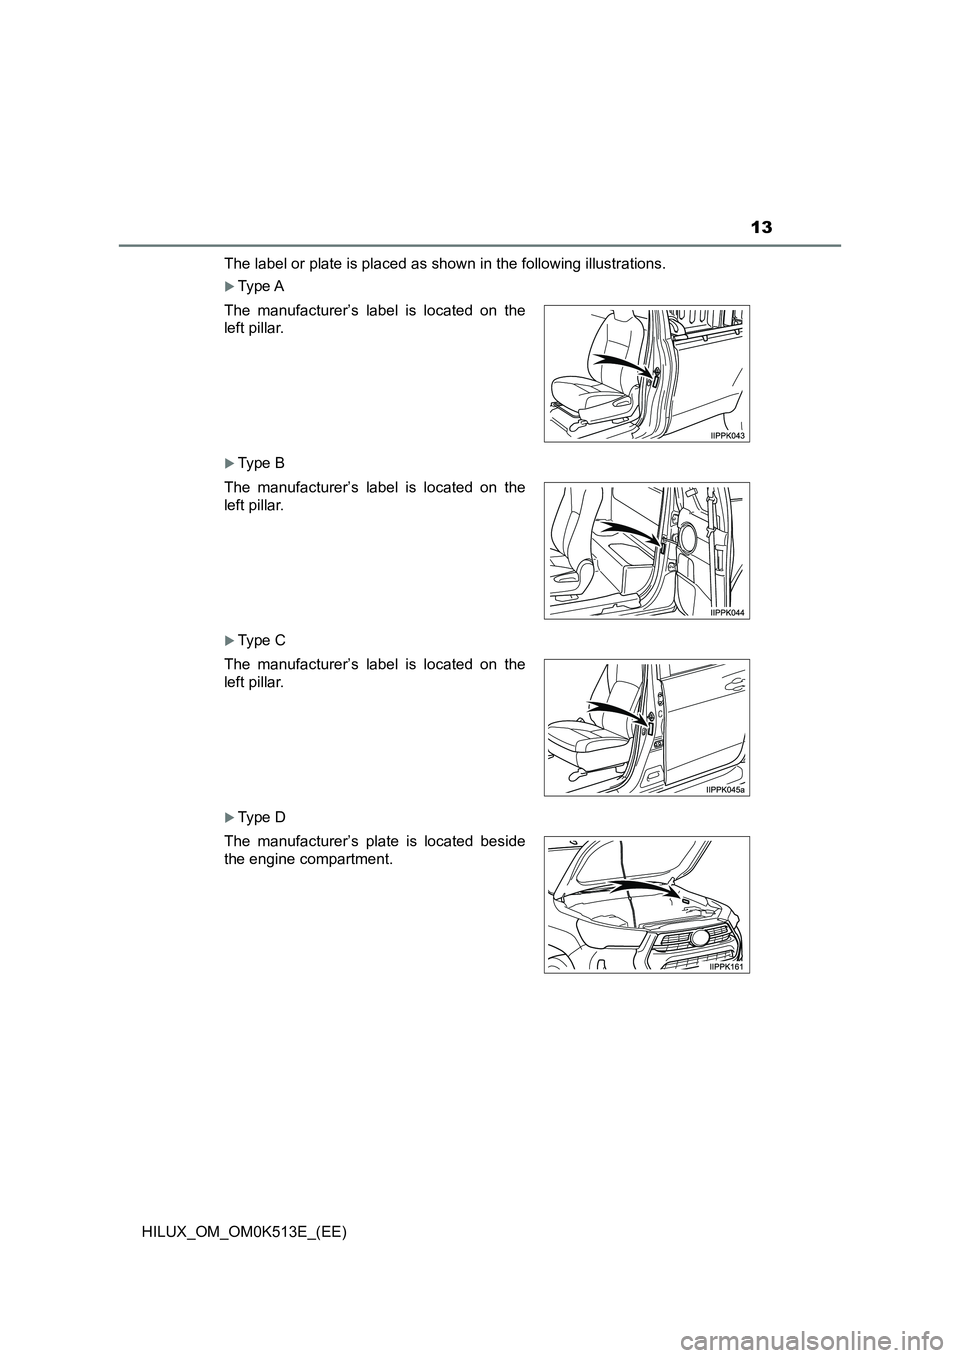 TOYOTA HILUX 2021  Owners Manual (in English) 13
HILUX_OM_OM0K513E_(EE) 
The label or plate is placed as shown in the following illustrations.
Type A
Type B
Type C
Type D 
The manufacturer’s label is located on the 
left pillar. 
Th